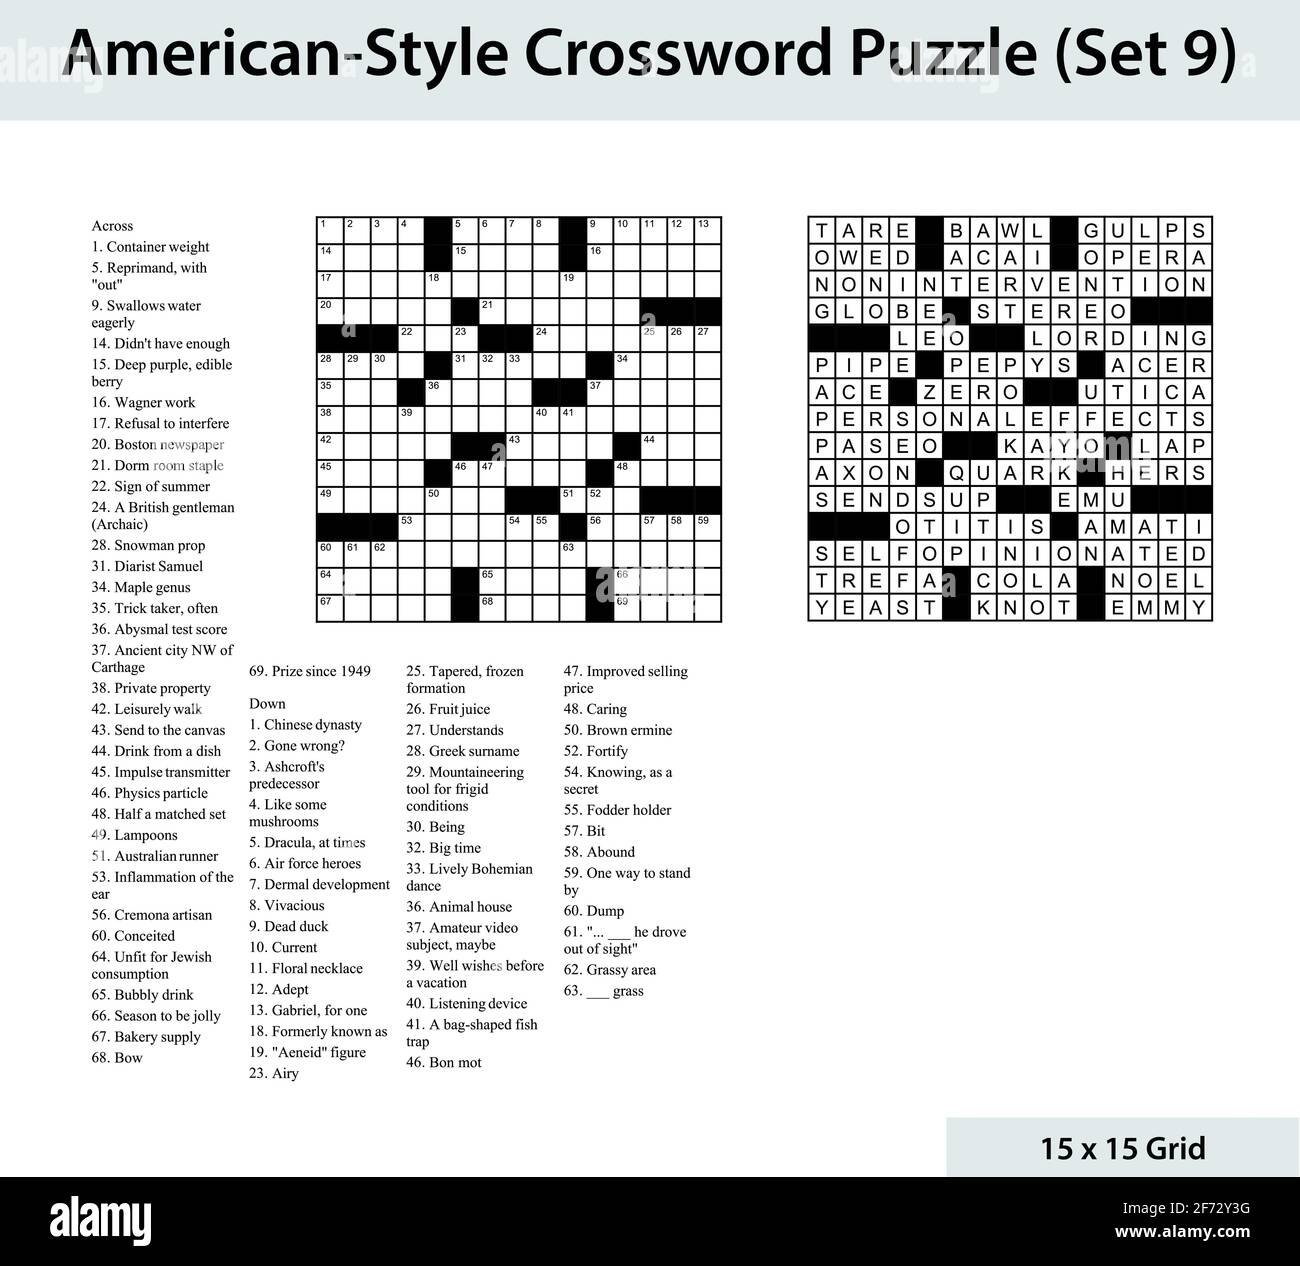 American style crossword puzzle with a 15 x 15 grid. Includes blank crossword grid, clues, and solution. Stock Vector